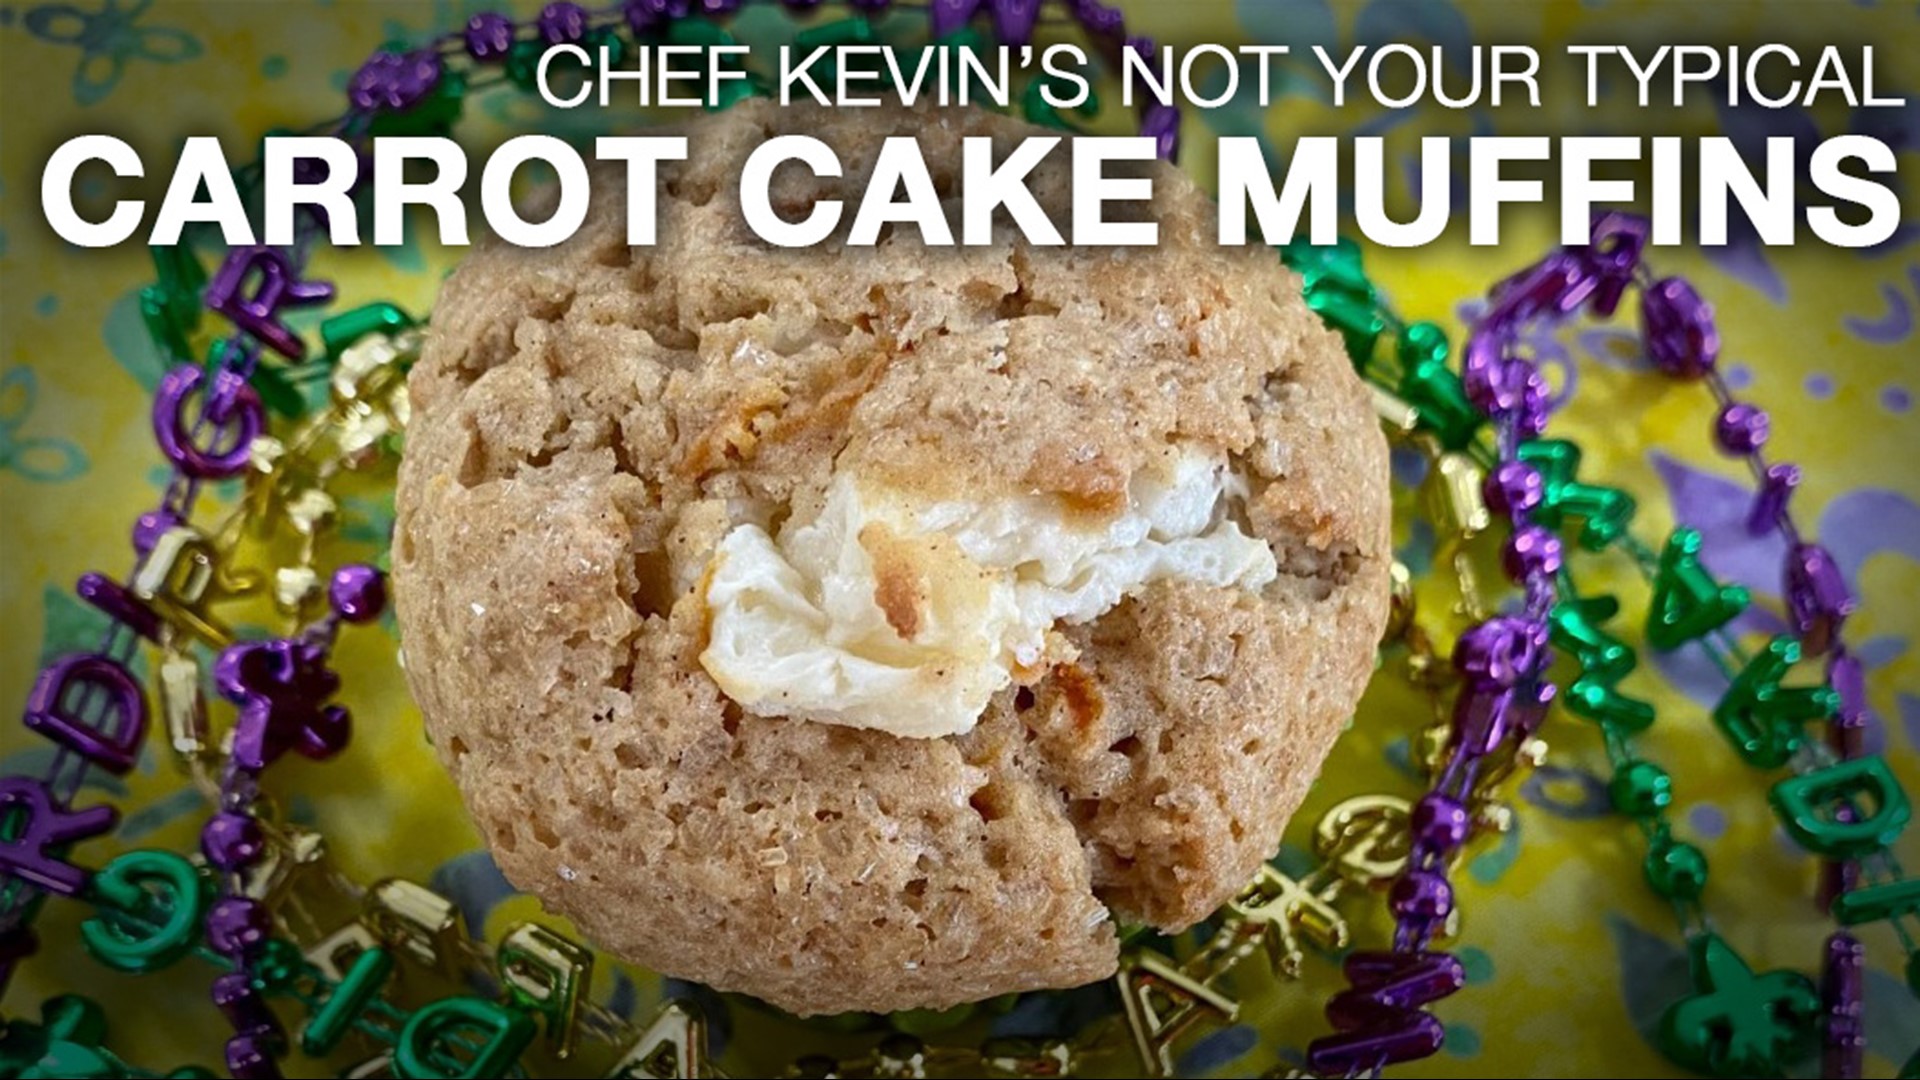 Instead of icing the outside, we put some filling on the INSIDE of these carrot cake muffins. You're going to love it!